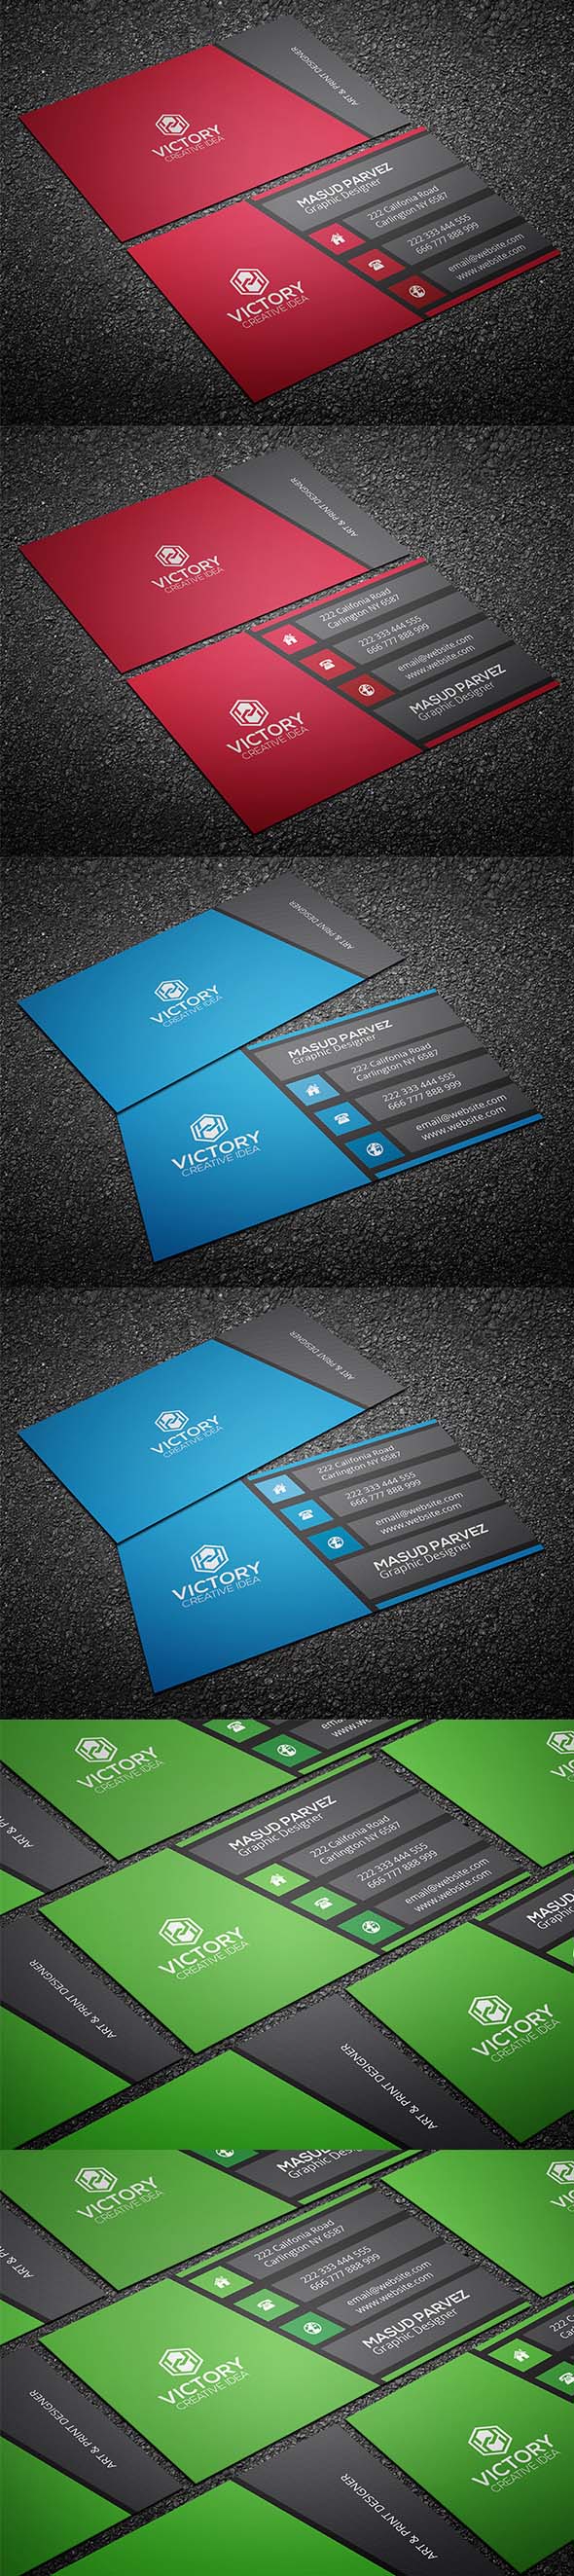 Corporate-Business-Card-Free